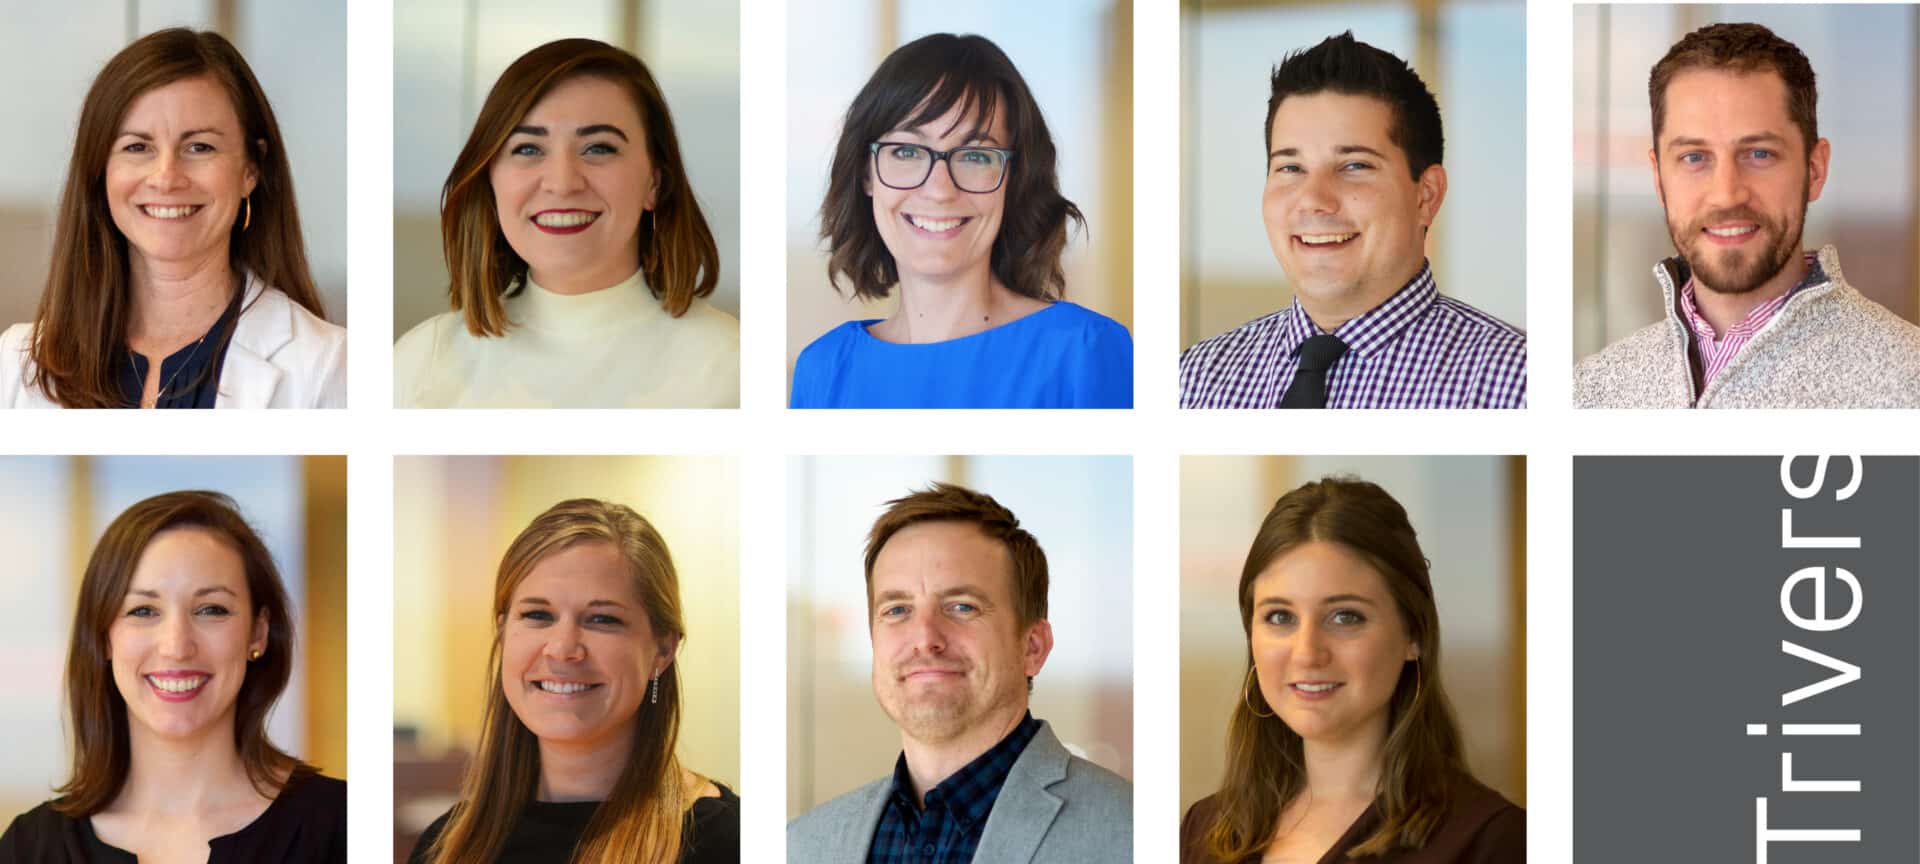 headshots of employees at trivers architectural firm in st. louis